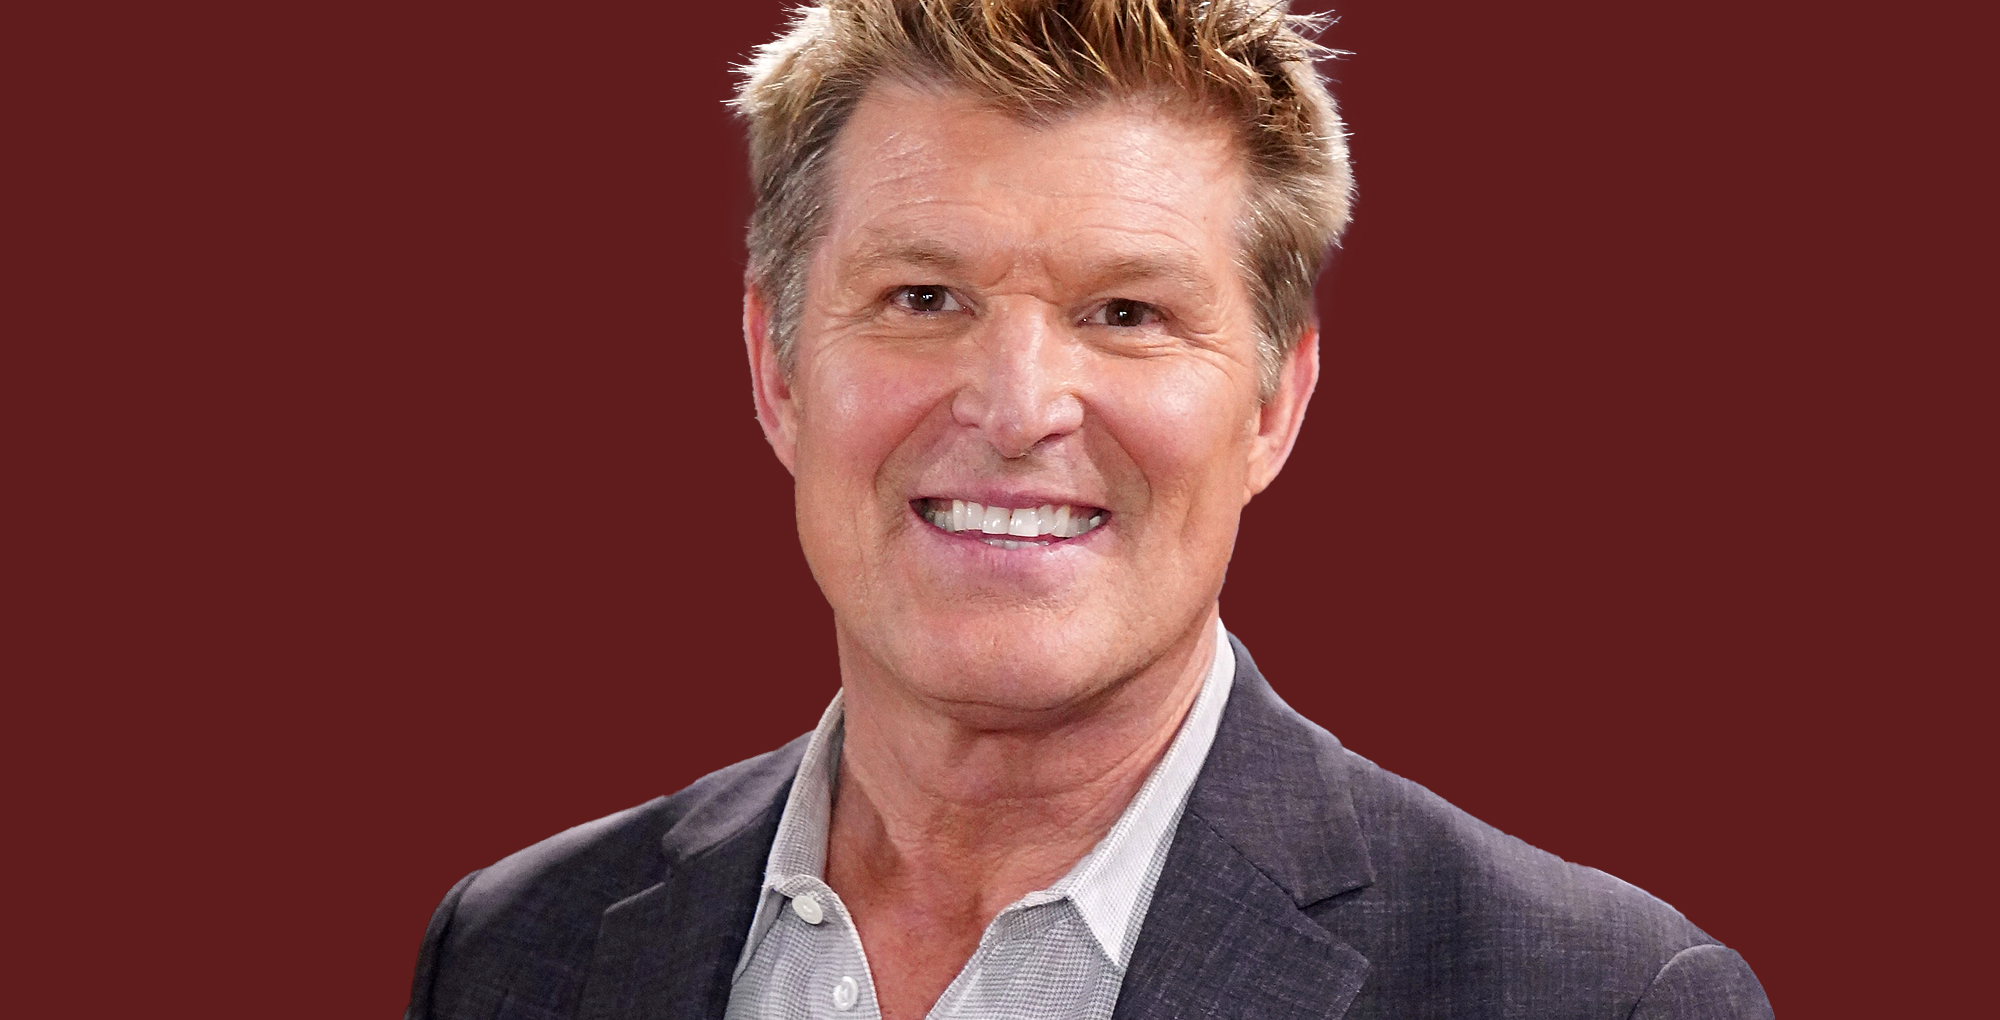 winsor harmon plays thorne forrester on bold and the beautiful.